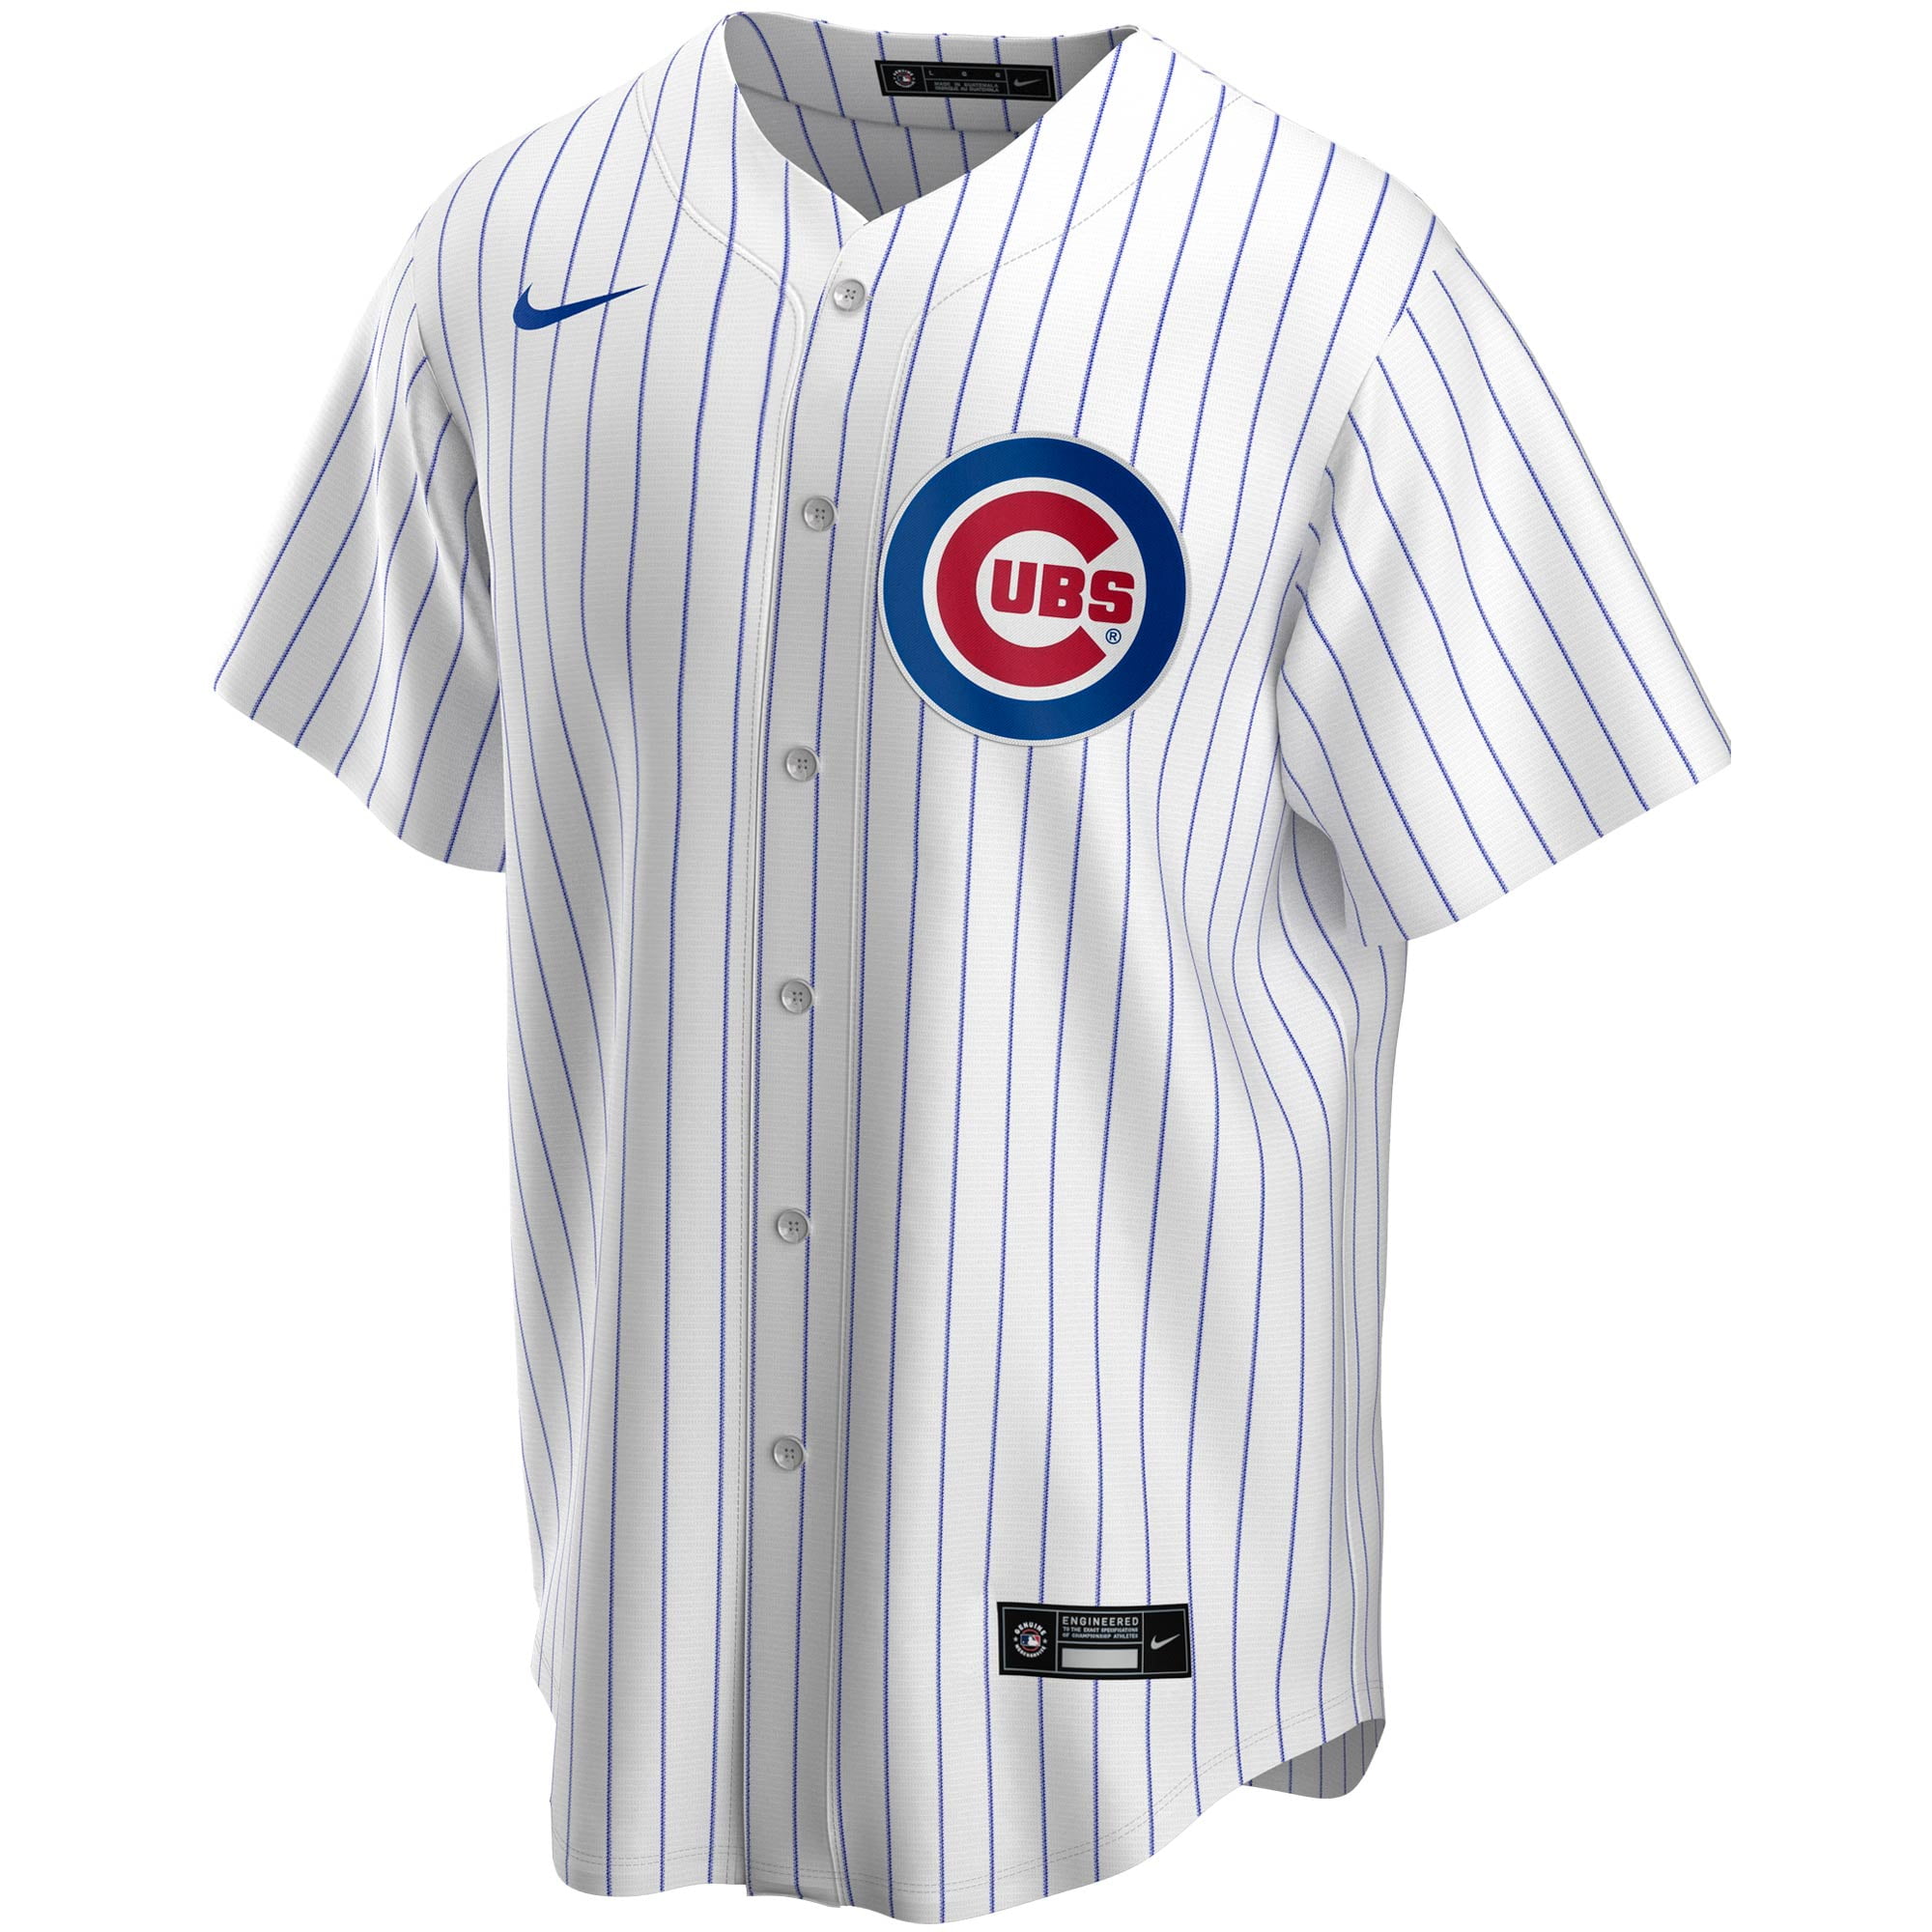 youth cubs baez jersey